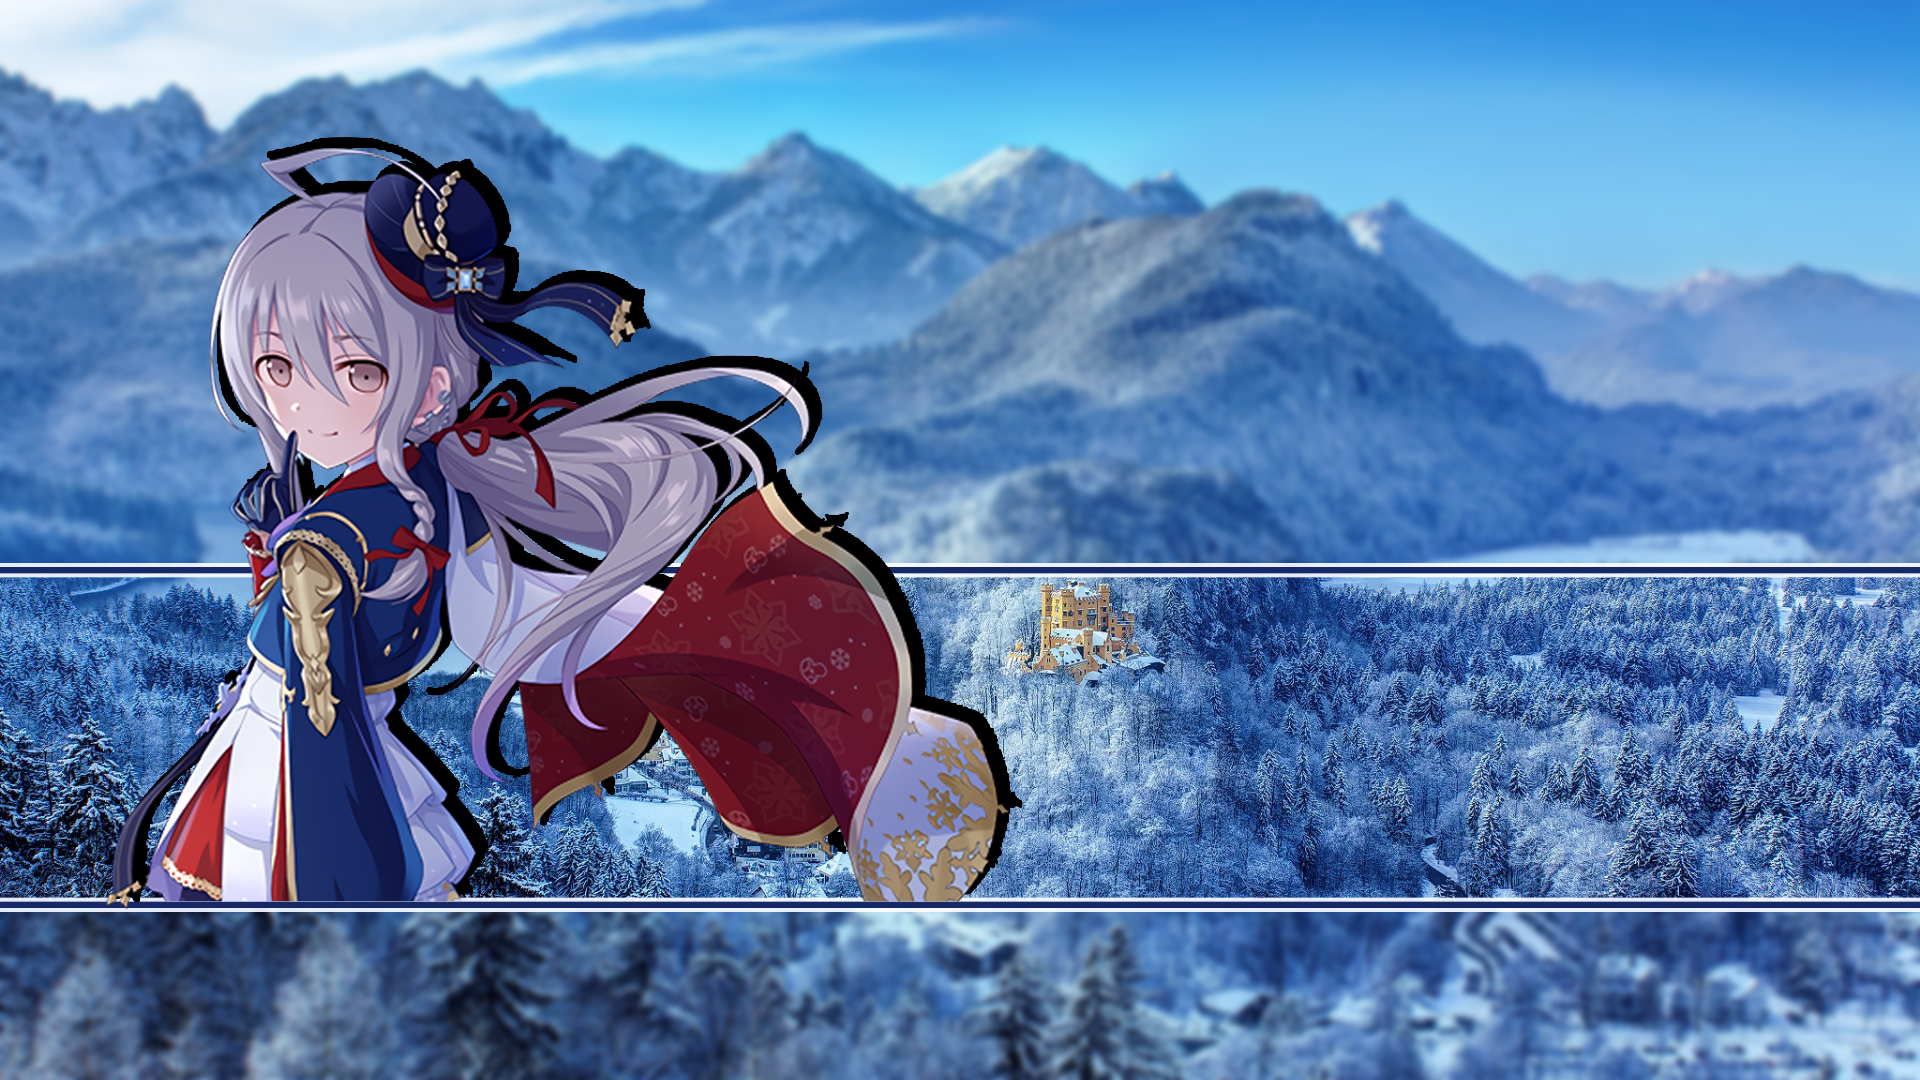 Anime 1920x1080 THE iDOLM@STER: Cinderella Girls anime girls picture-in-picture snow castle mountains forest THE iDOLM@STER